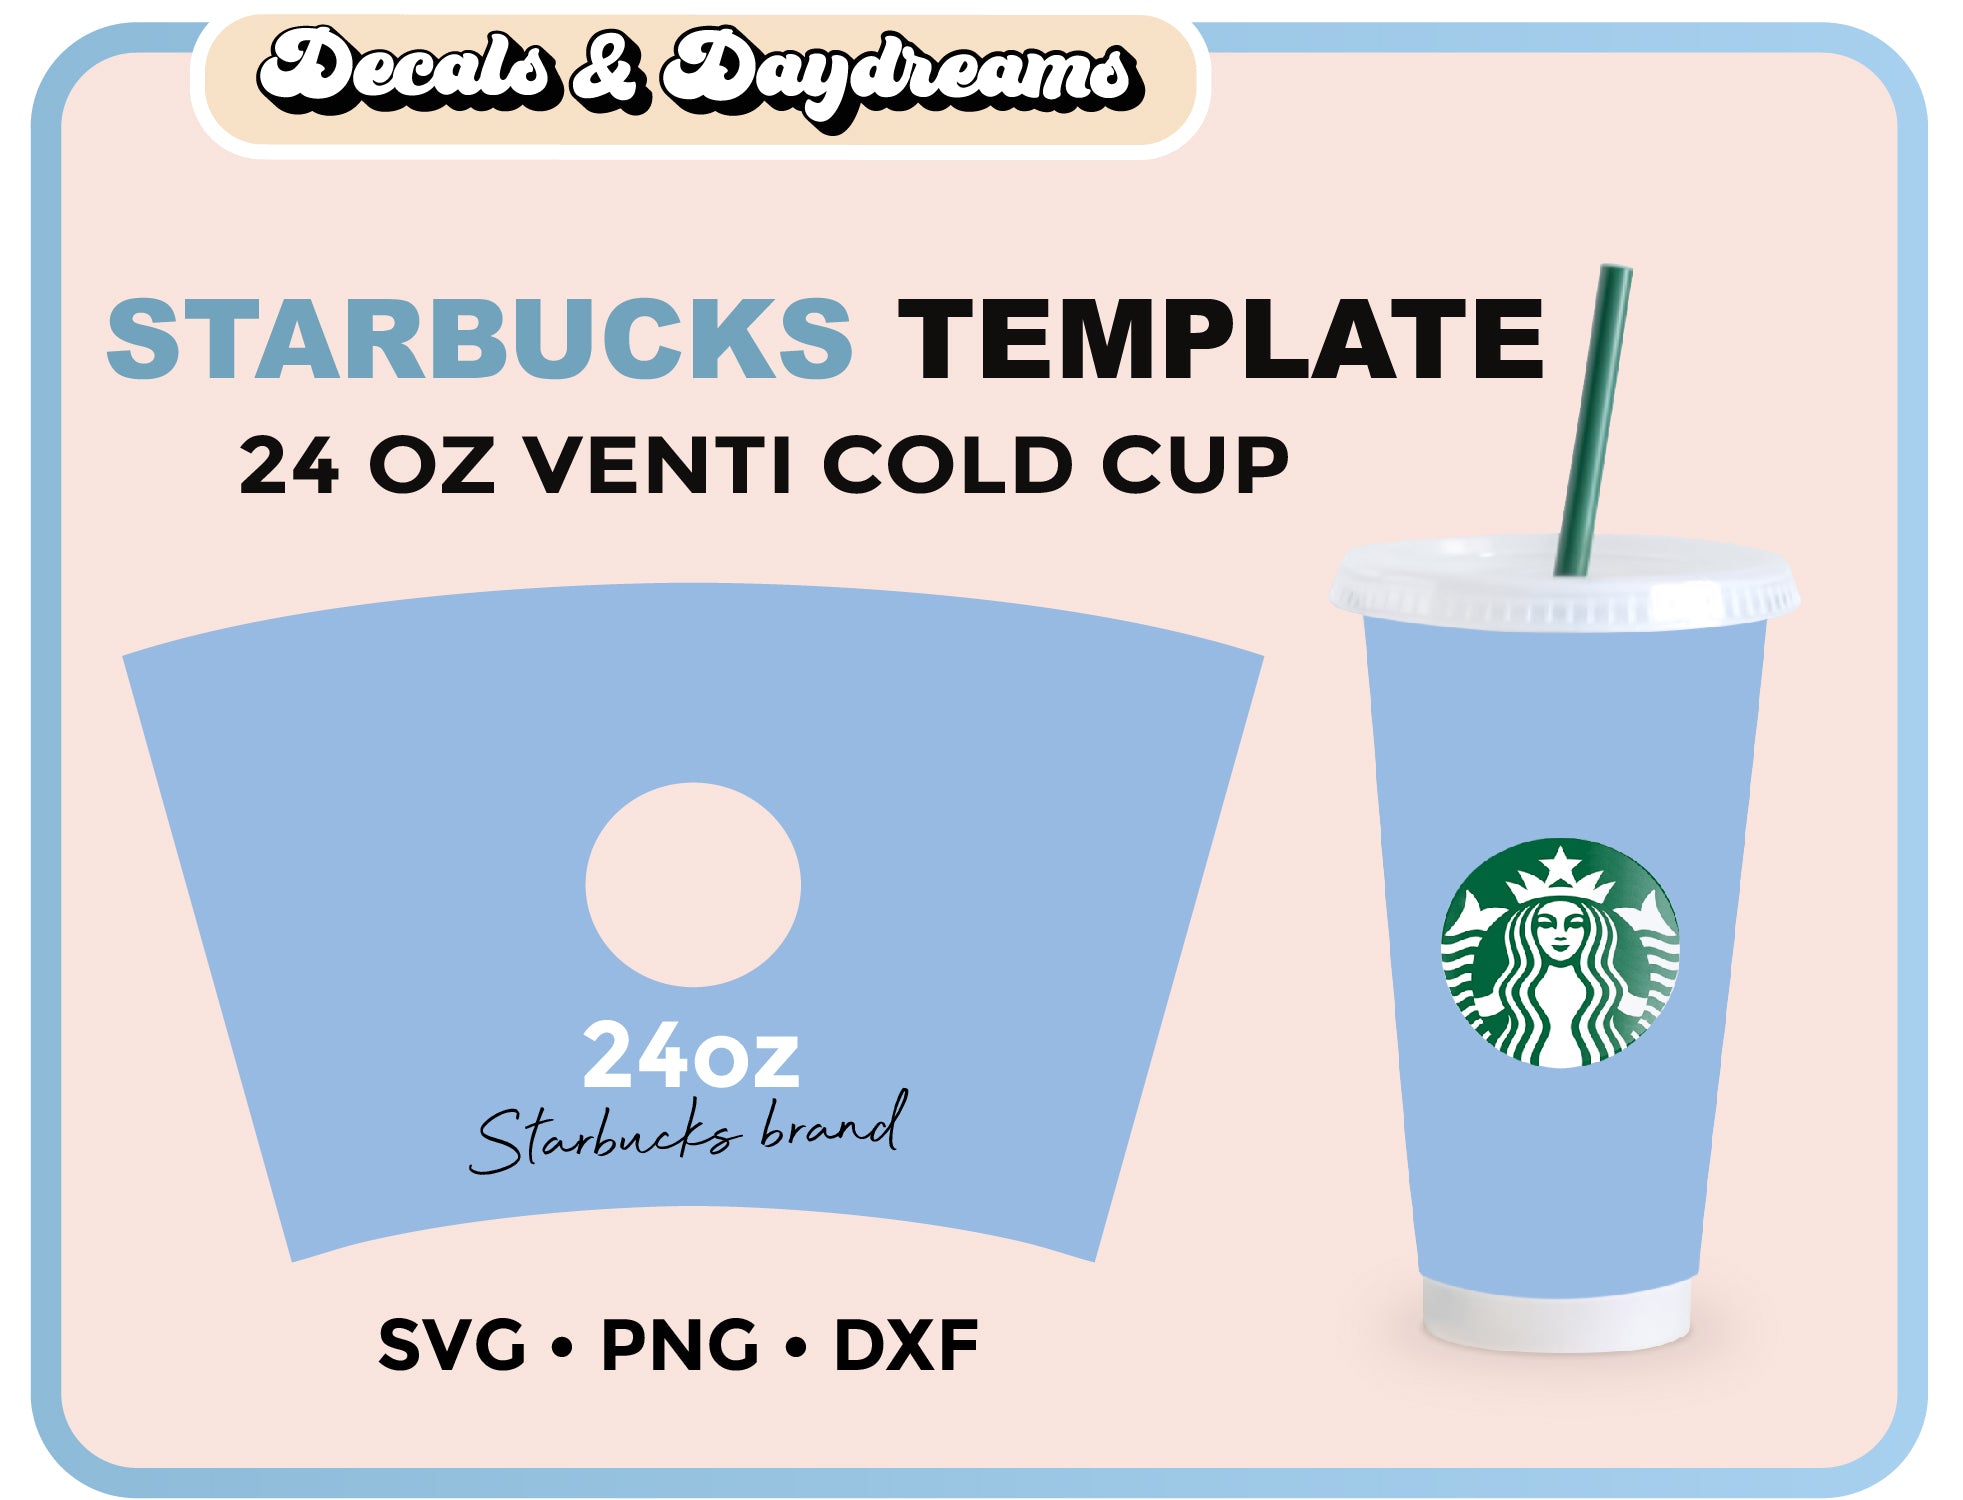 Starbucks 24oz Cold Cup Template – Decals And Daydreams